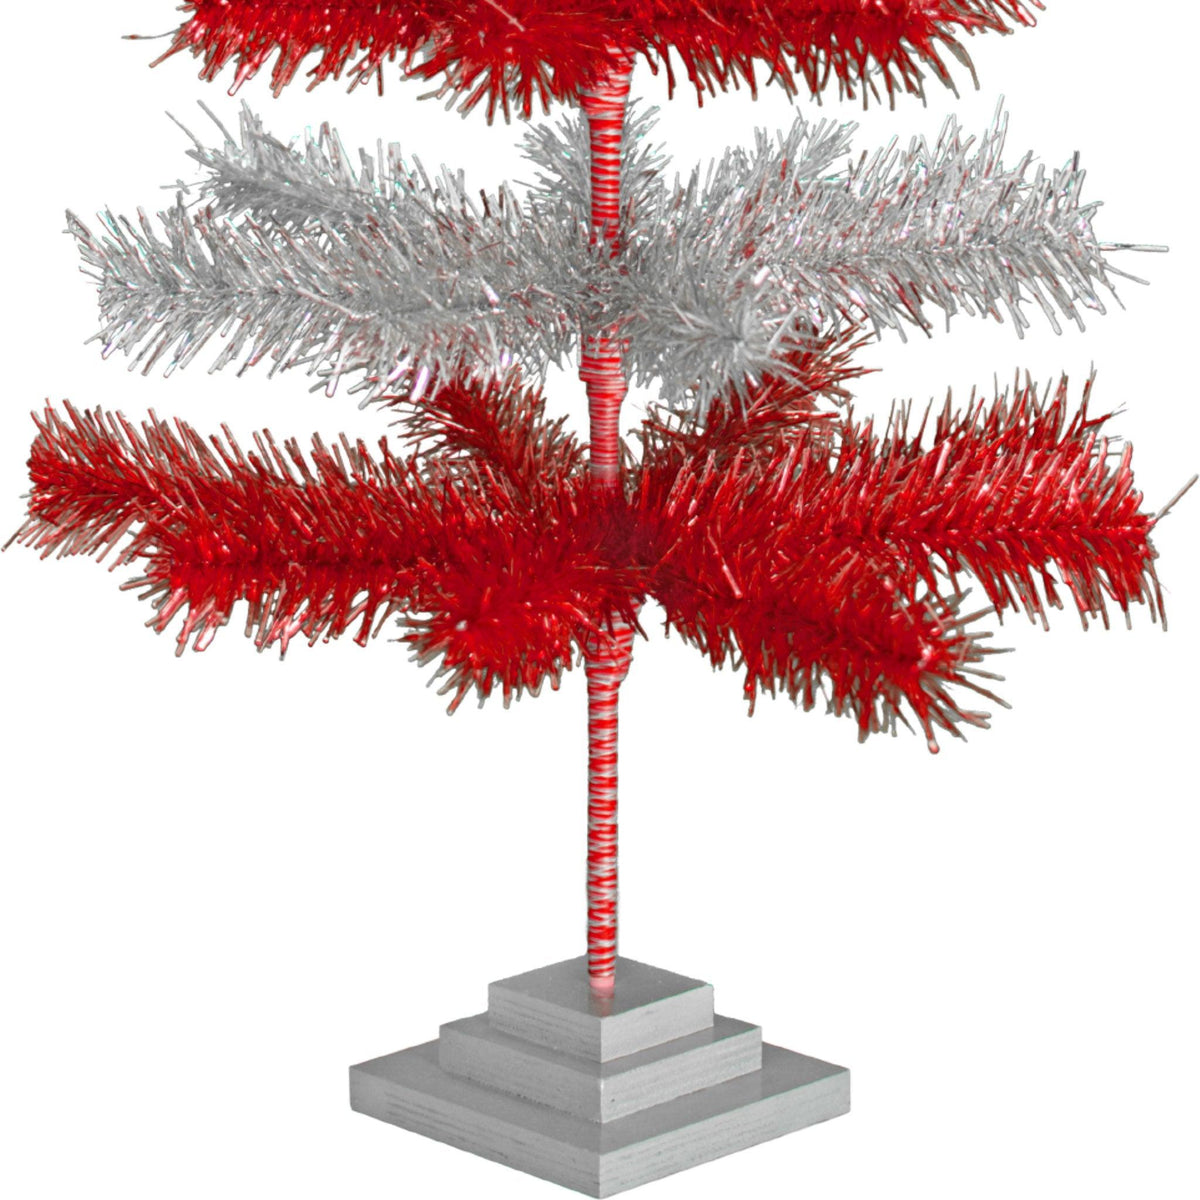 Red & Silver Layered Tinsel Christmas Trees!    Decorate for the holidays with a Shiny Red and Metallic Silver retro-style Christmas Tree.  On sale now at leedisplay.com